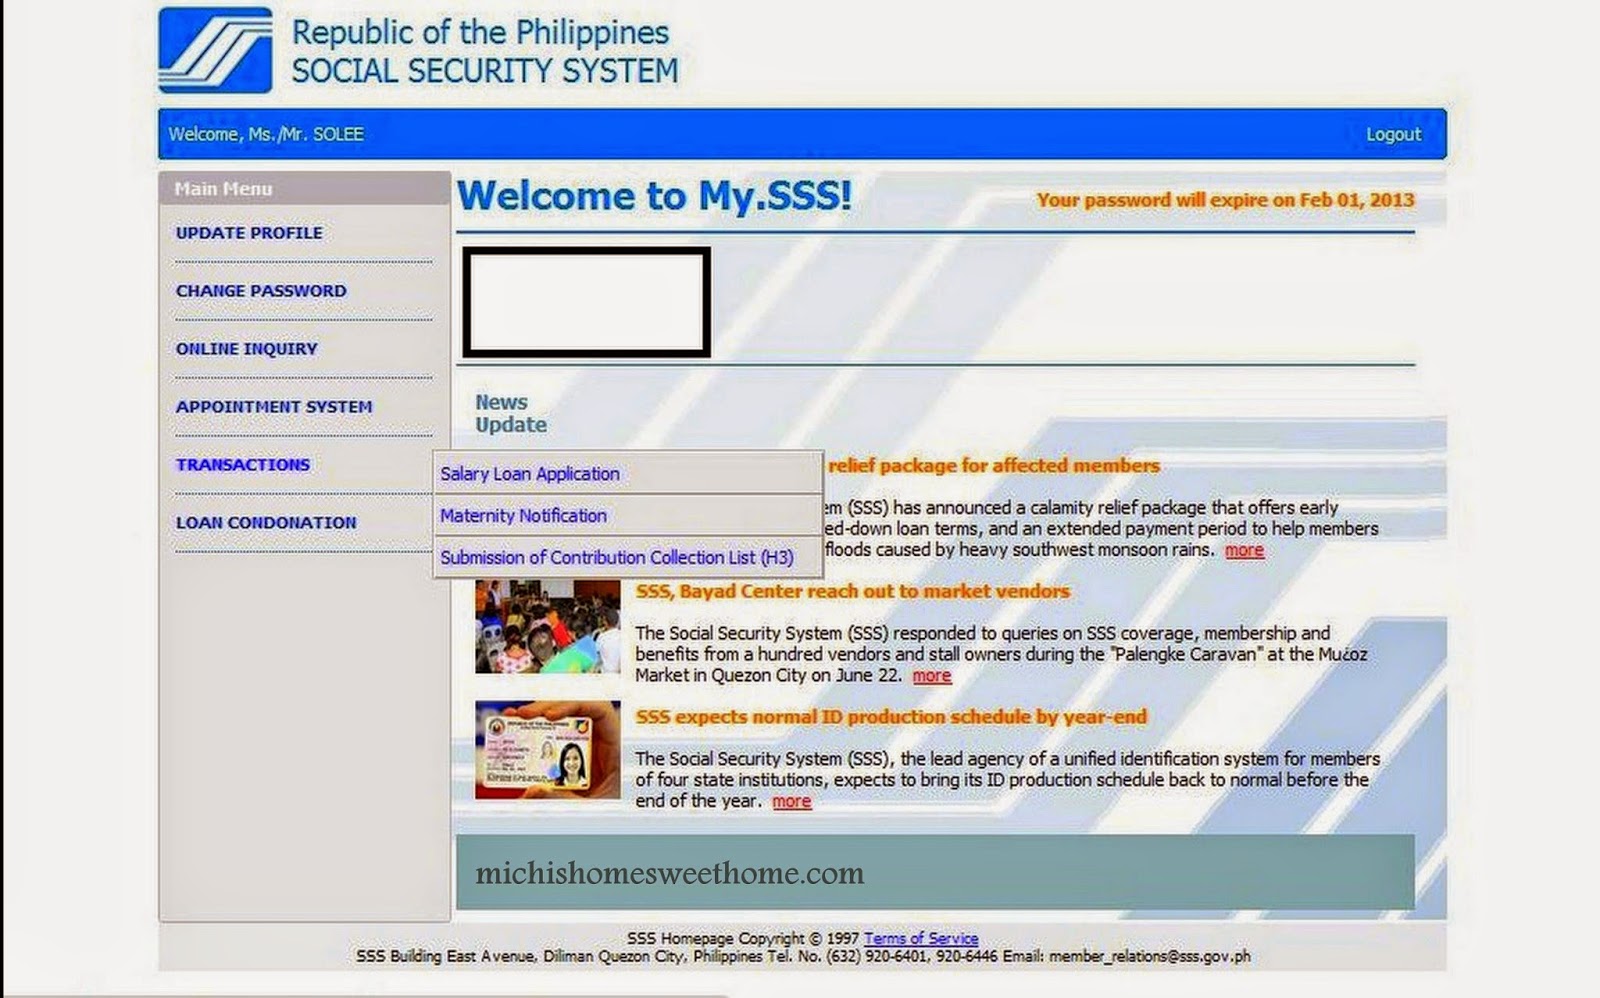 Michi Photostory: How to Apply for SSS Salary Loan via Online